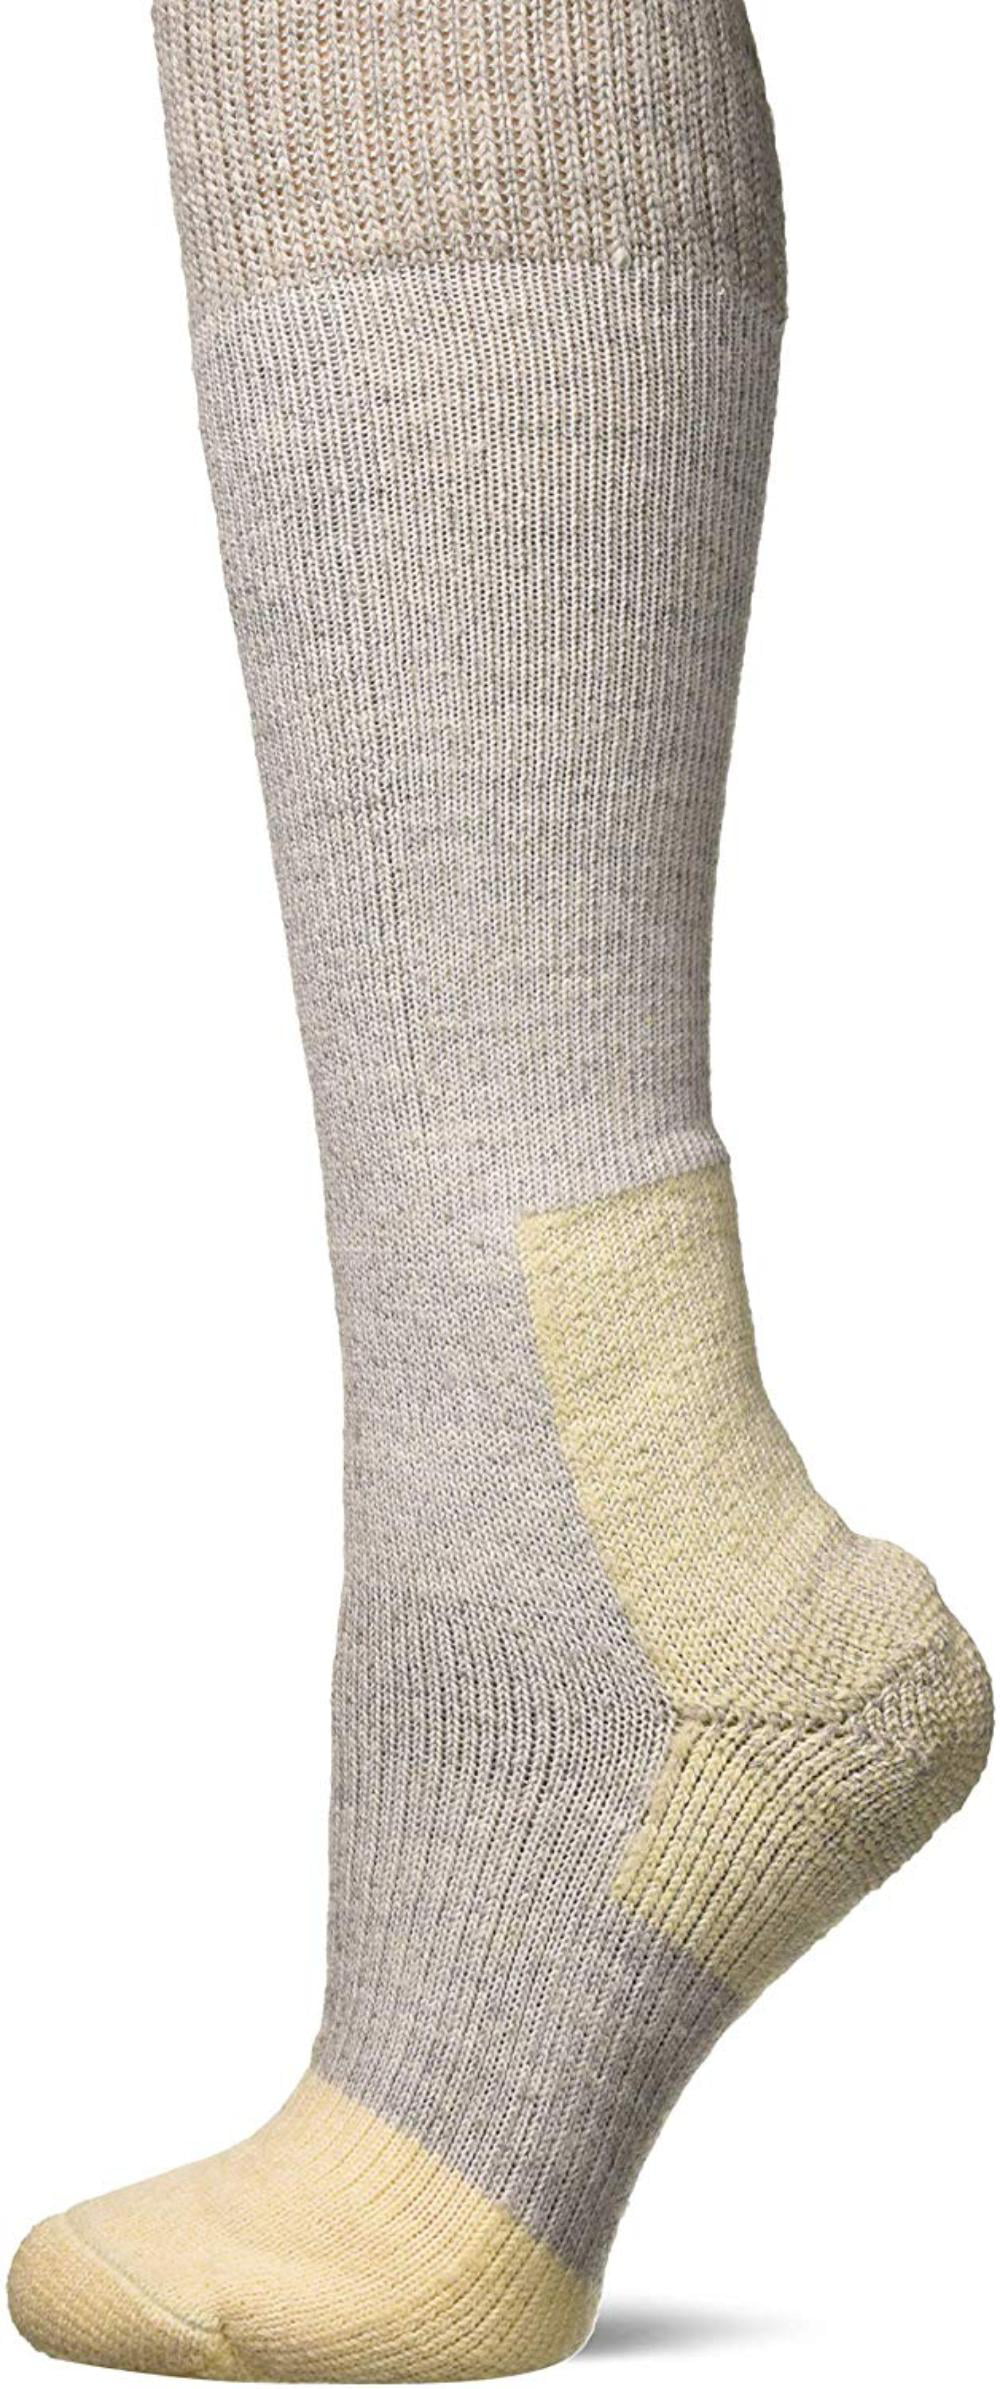 Thorlos Unisex EXCO Extreme Cold Thick Padded Over the Calf Sock